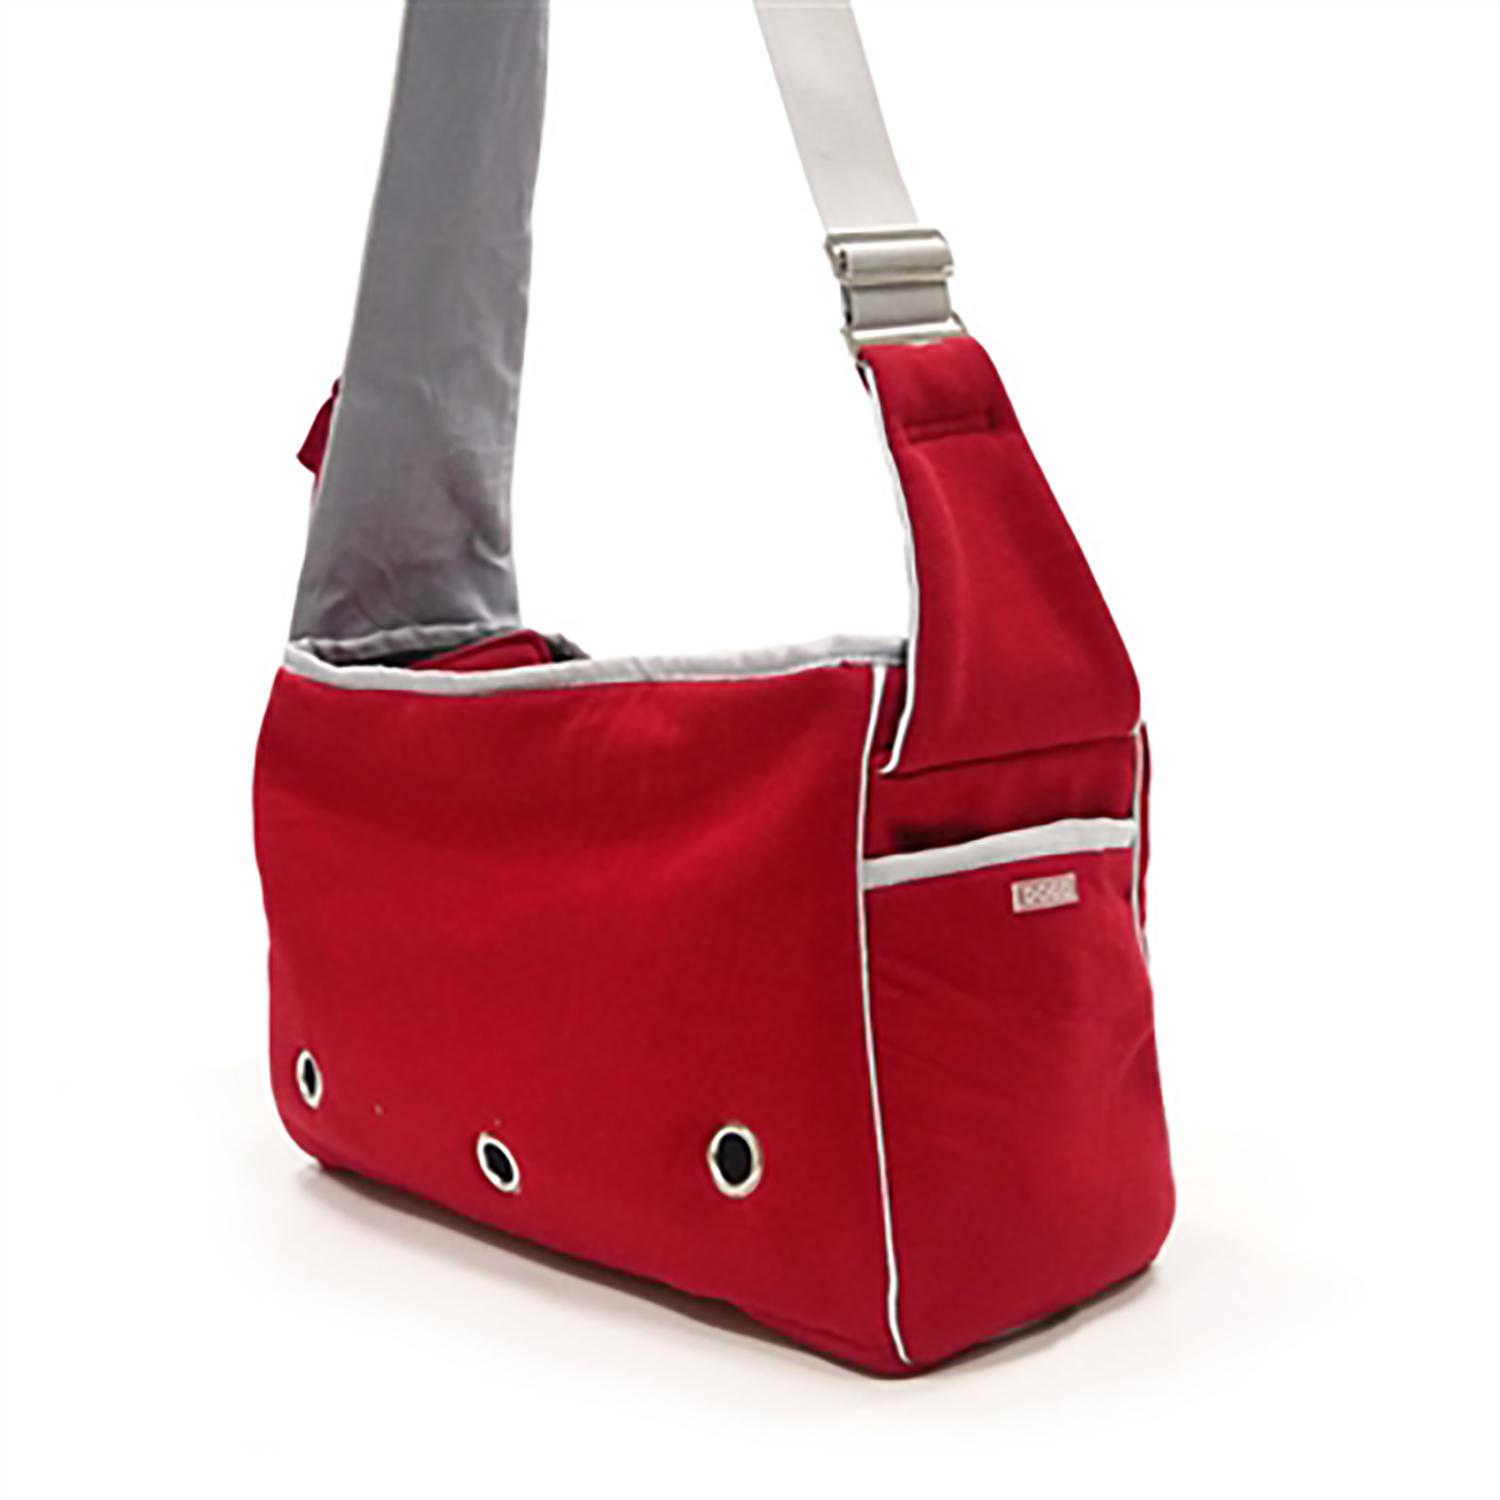 Boxy Messenger Bag Dog Carrier by Dogo - Red